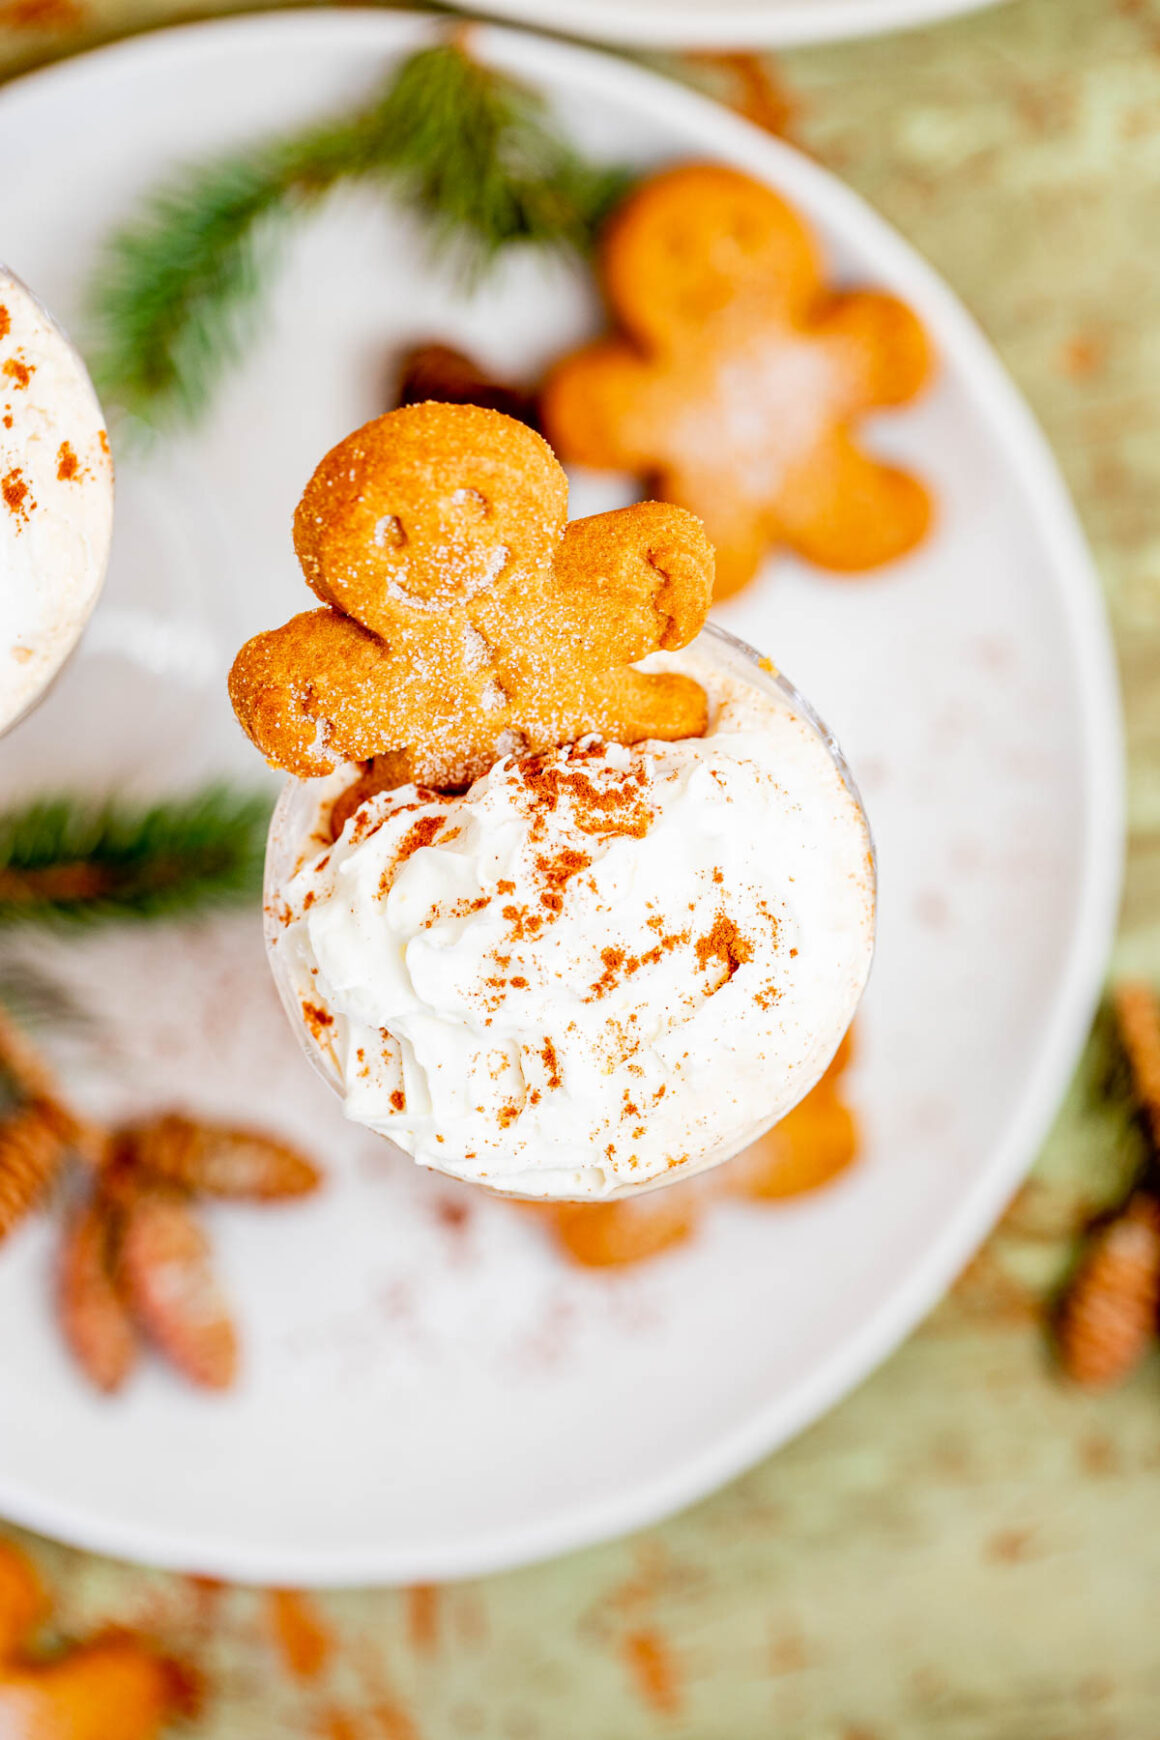 Gingerbread fills the air and the flavor of the holidays dances on your palate.